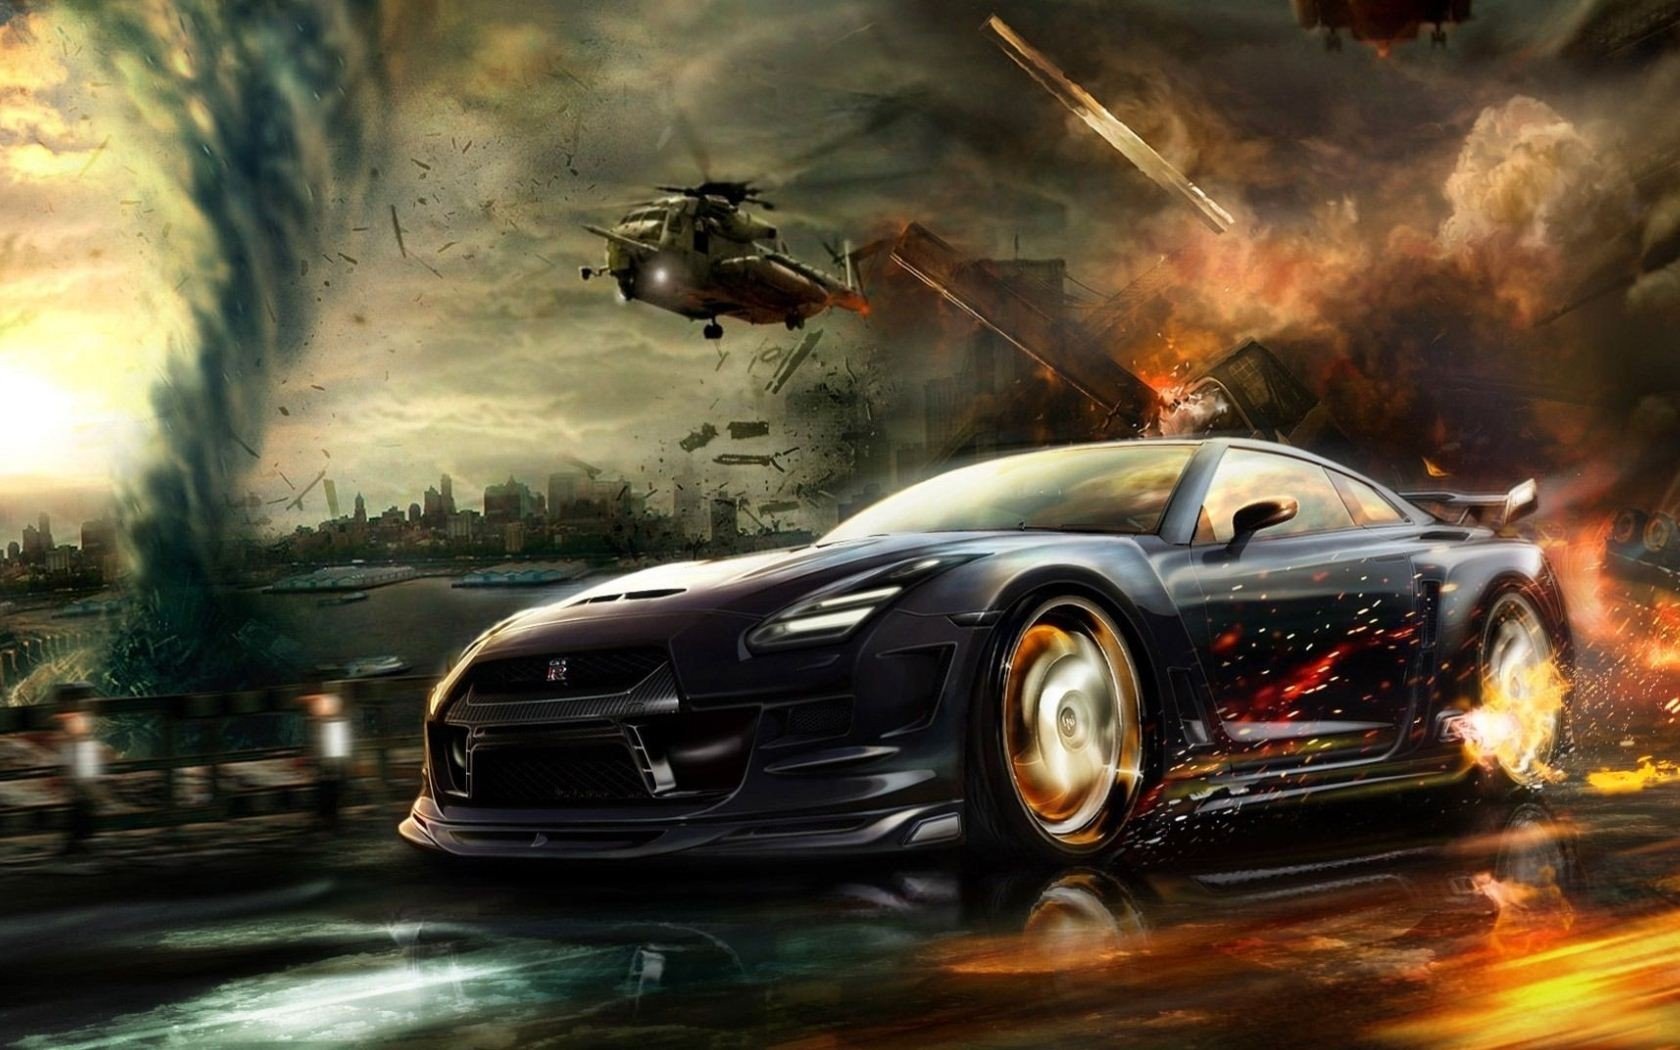 clouds, Helicopters, Cars, Explosions, Fire, Storm, Weather, Tornadoes, Nissan, Technics, Artwork, Vehicles, Explosions, In, The, Sky, Nissan, Gt r, Storm, Front, Skies, Fast, Nissan, Gt r, R35 Wallpaper